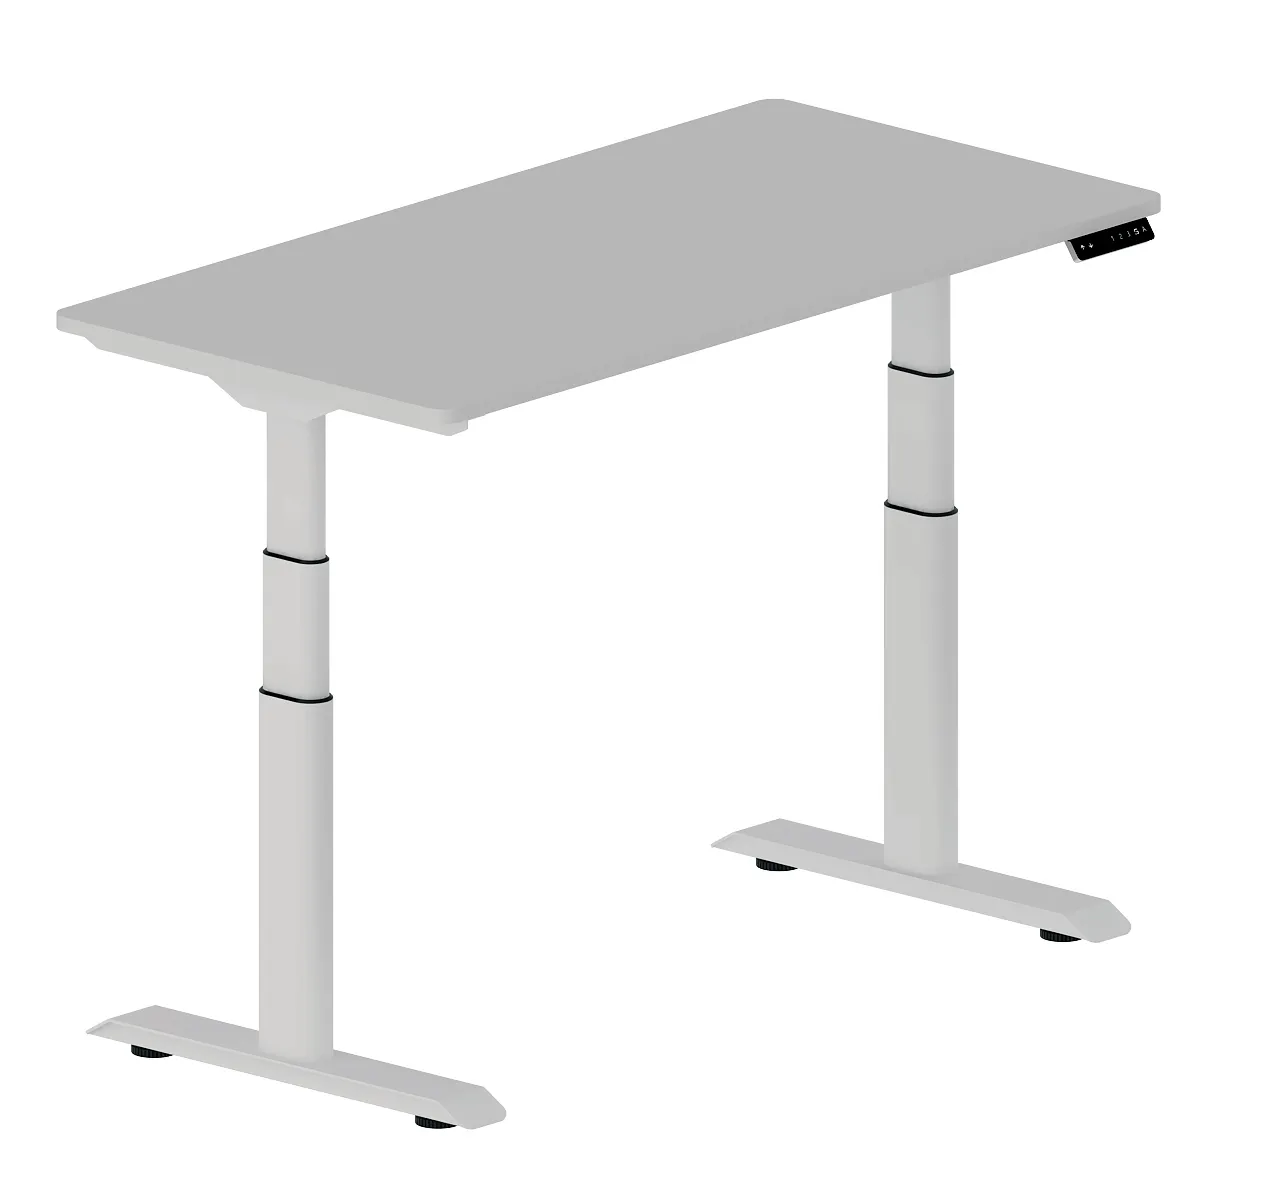 Commercial Furniture sit stand height adjustable office desk